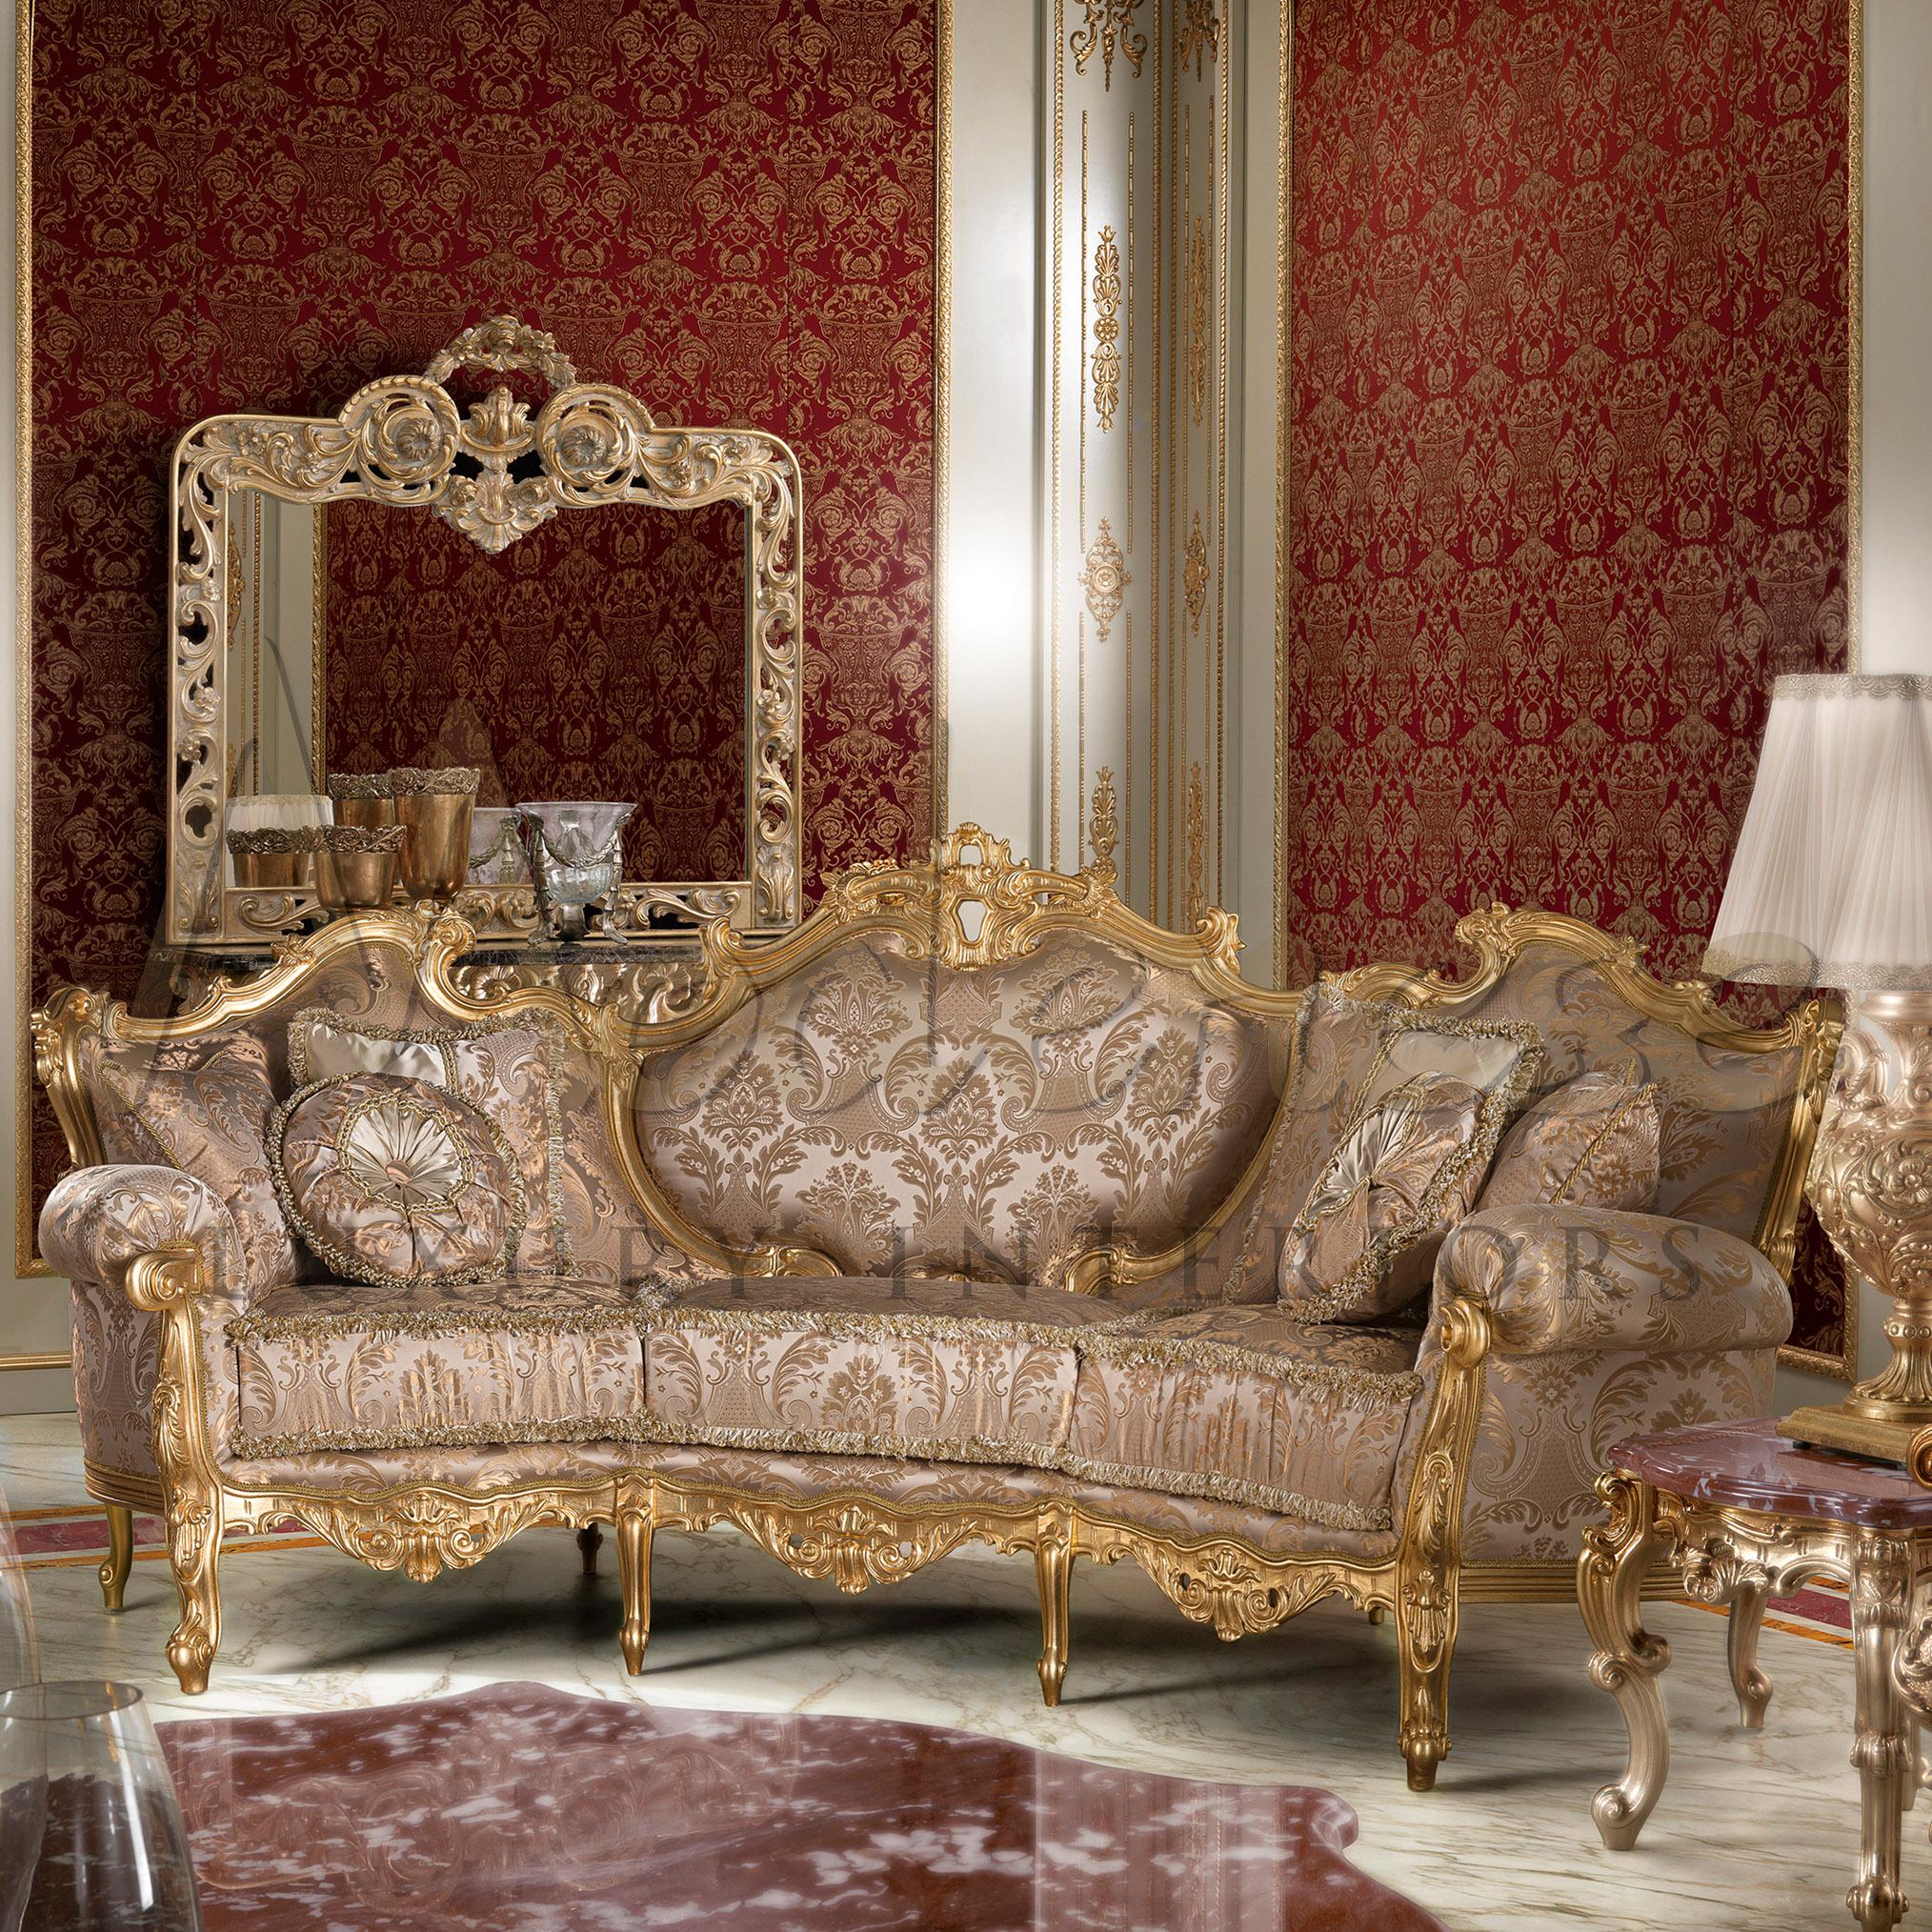 Bringing the royal elegance to your living space with the dramatic silhouette of this three seater classic French palace style sofa. The ornate design over legs and seating crown are meticulously hand carved and gilded by our experienced artisans.